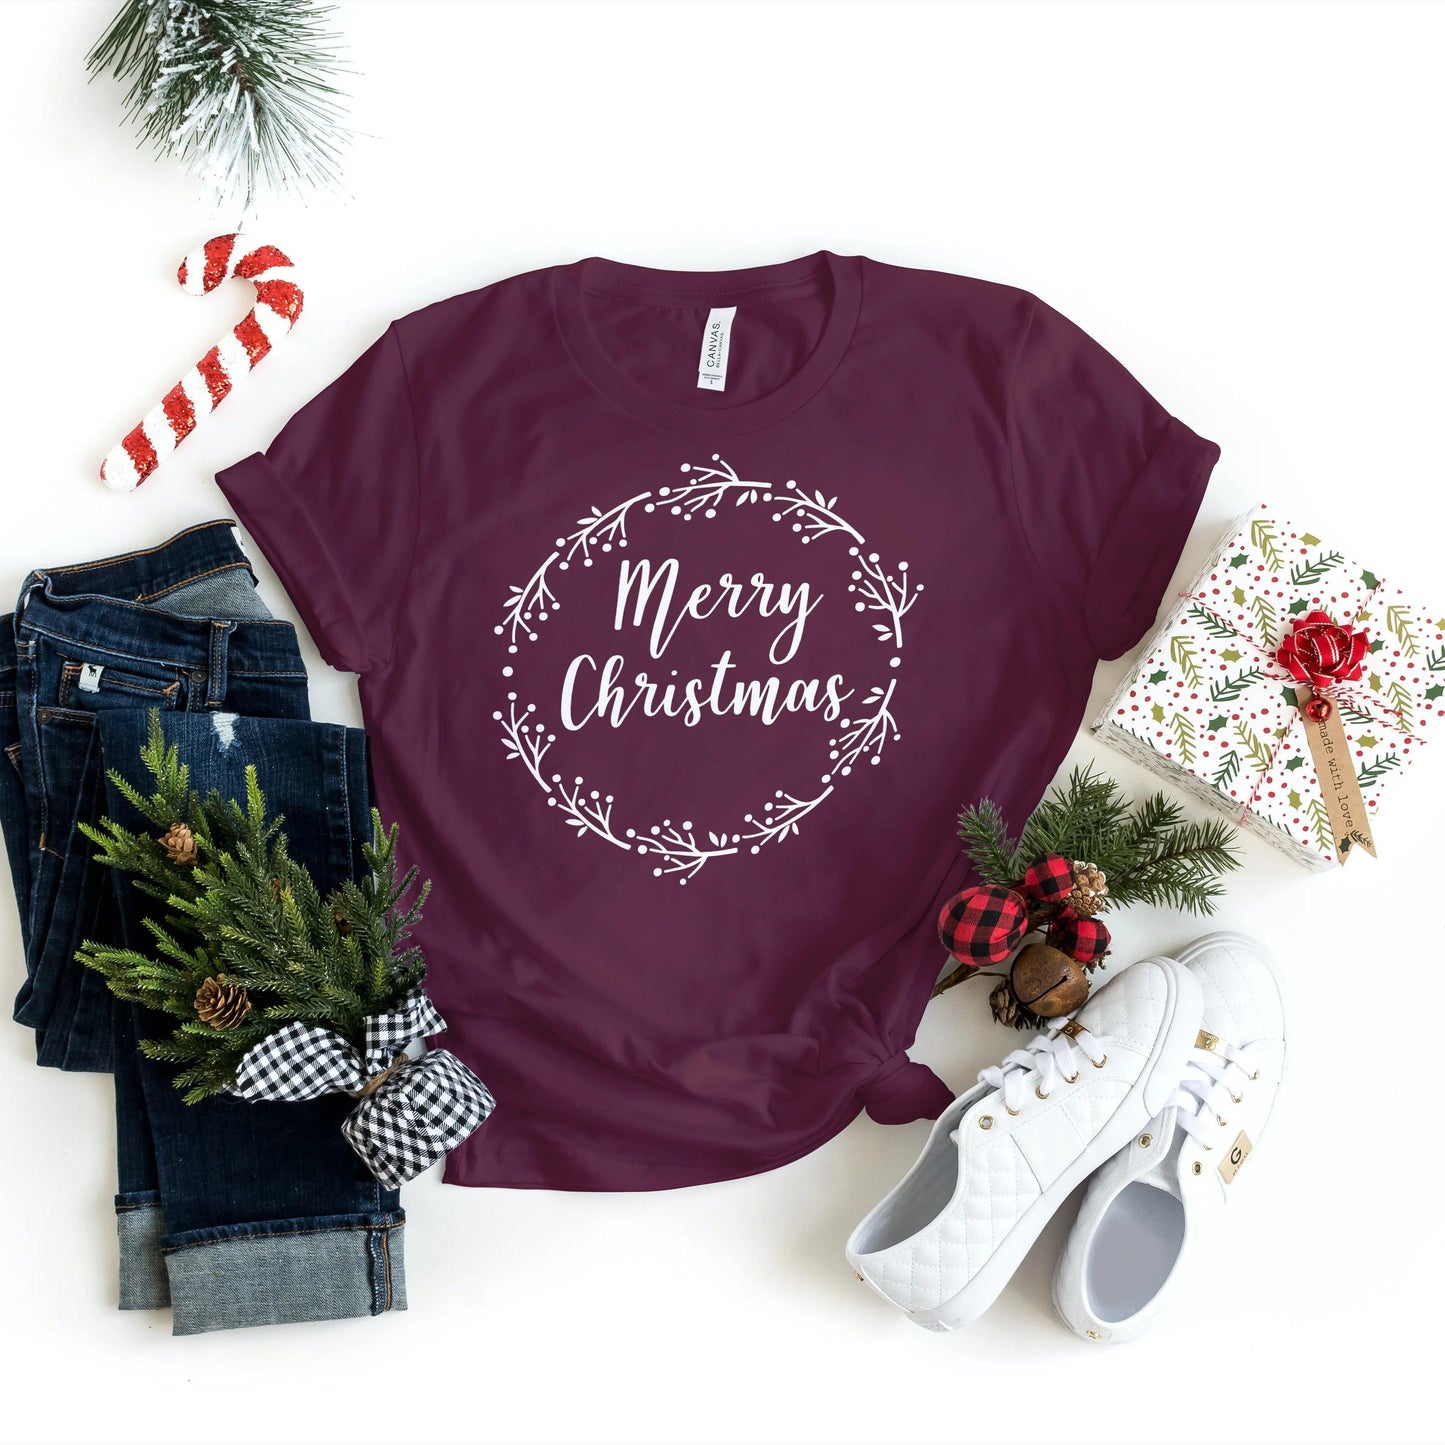 Christmas Shirts - Merry Christmas 2 - Holiday Shirts - Gifts - Healthy Wealthy Skinny